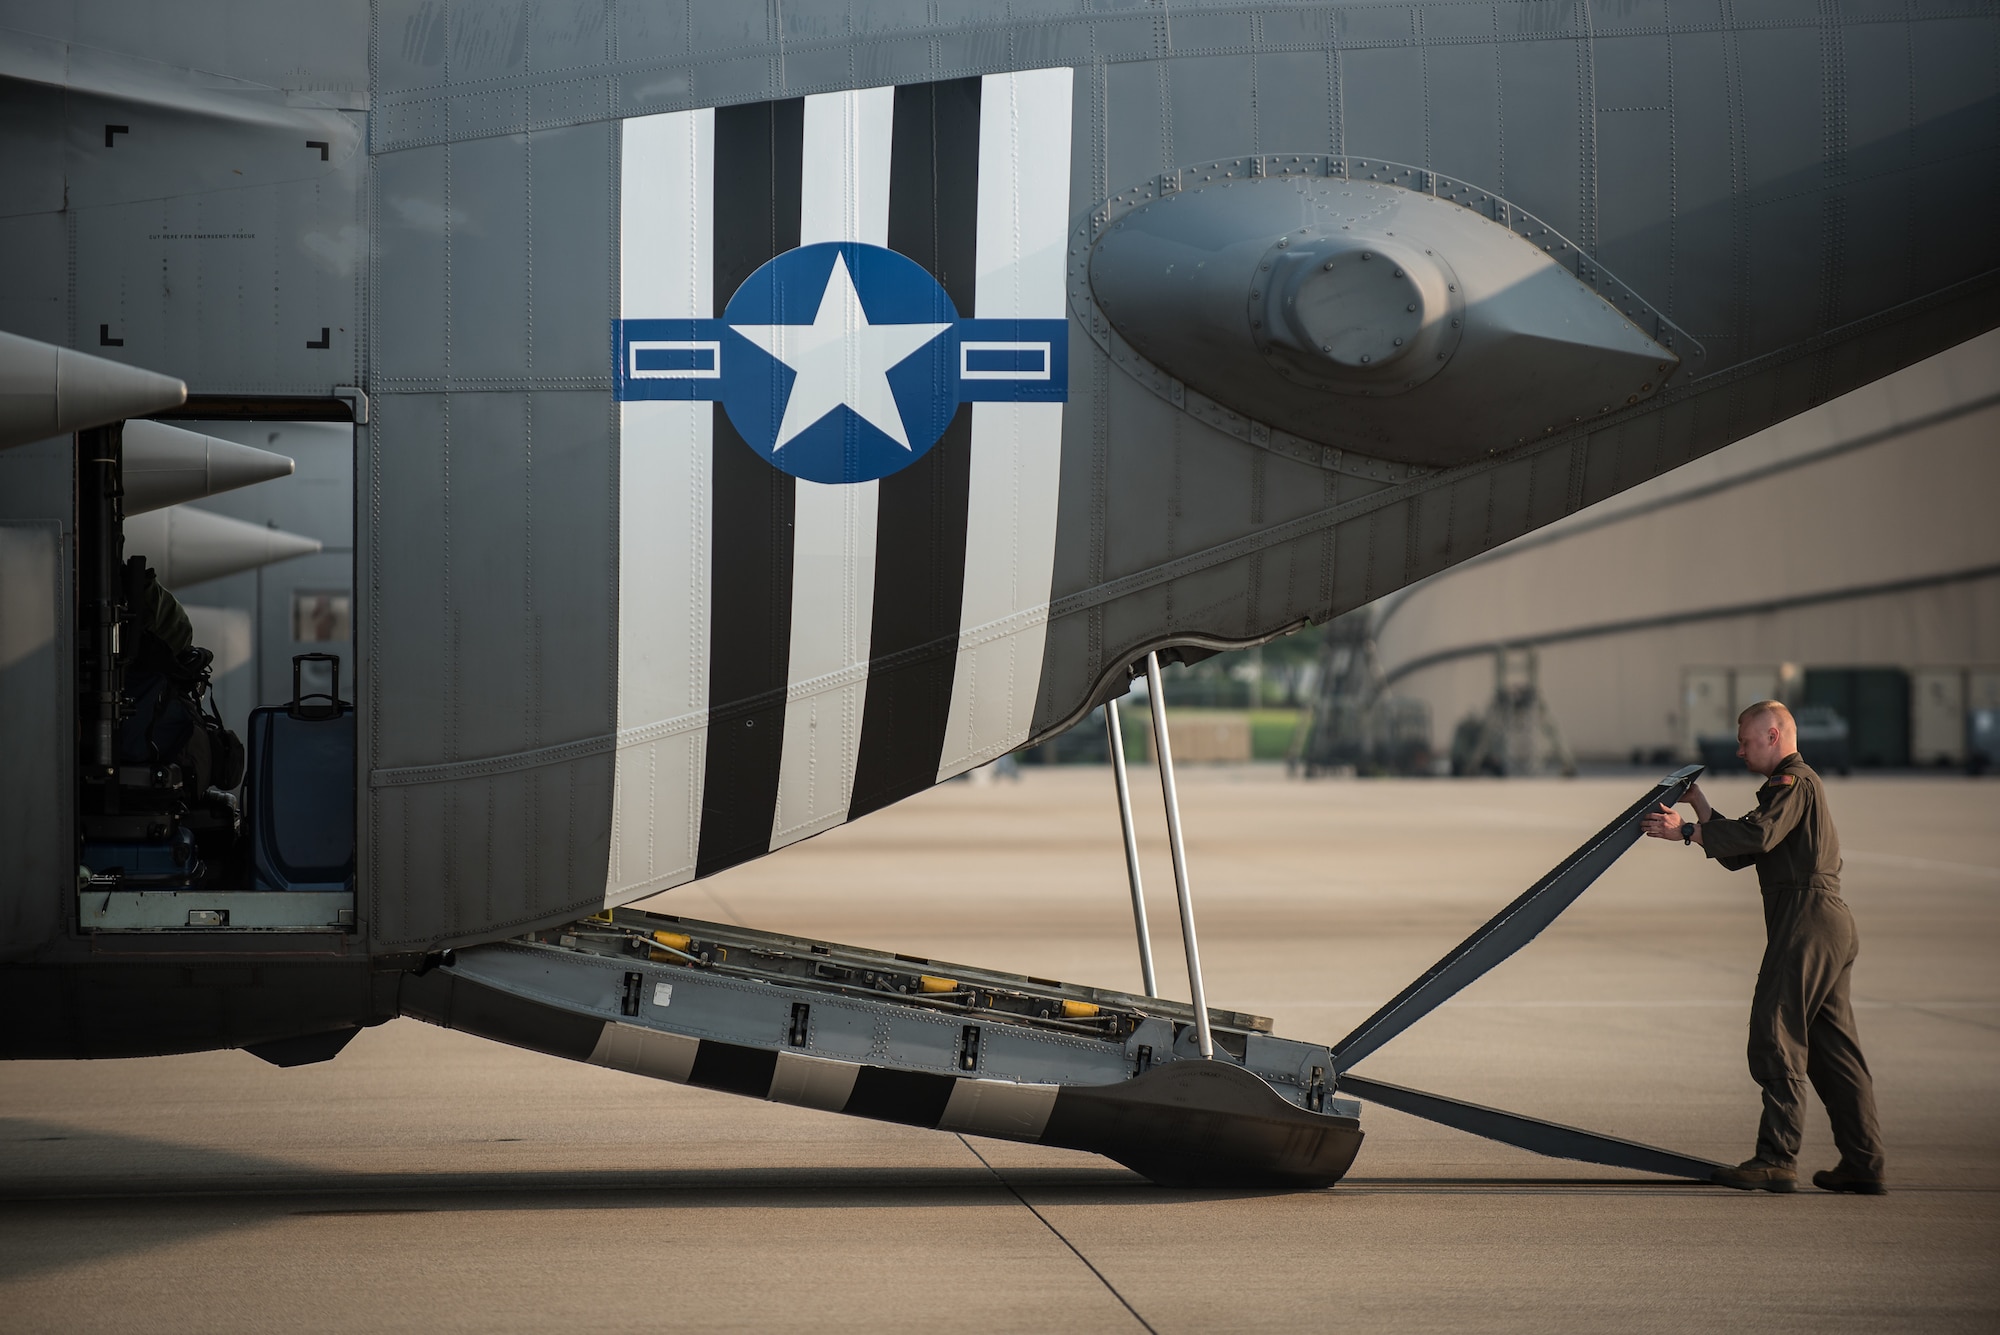 Senior Airman Brett Hook, a loadmaster for the 123rd Airlift Wing, closes the ramp on a C-130 Hercules aircraft at the Kentucky Air National Guard Base in Louisville, Ky., June 1, 2019, in preparation for a deployment to France. Hook and 30 other Kentucky Air Guardsmen will participate in the 75th-anniversary reenactment of D-Day there by airdropping U.S. Army paratroopers over Normandy on June 9. The aircraft has been striped with historically accurate Allied Forces livery in honor of the event, which turned the tide of World War II in the European theater. (U.S. Air National Guard photo by Dale Greer)